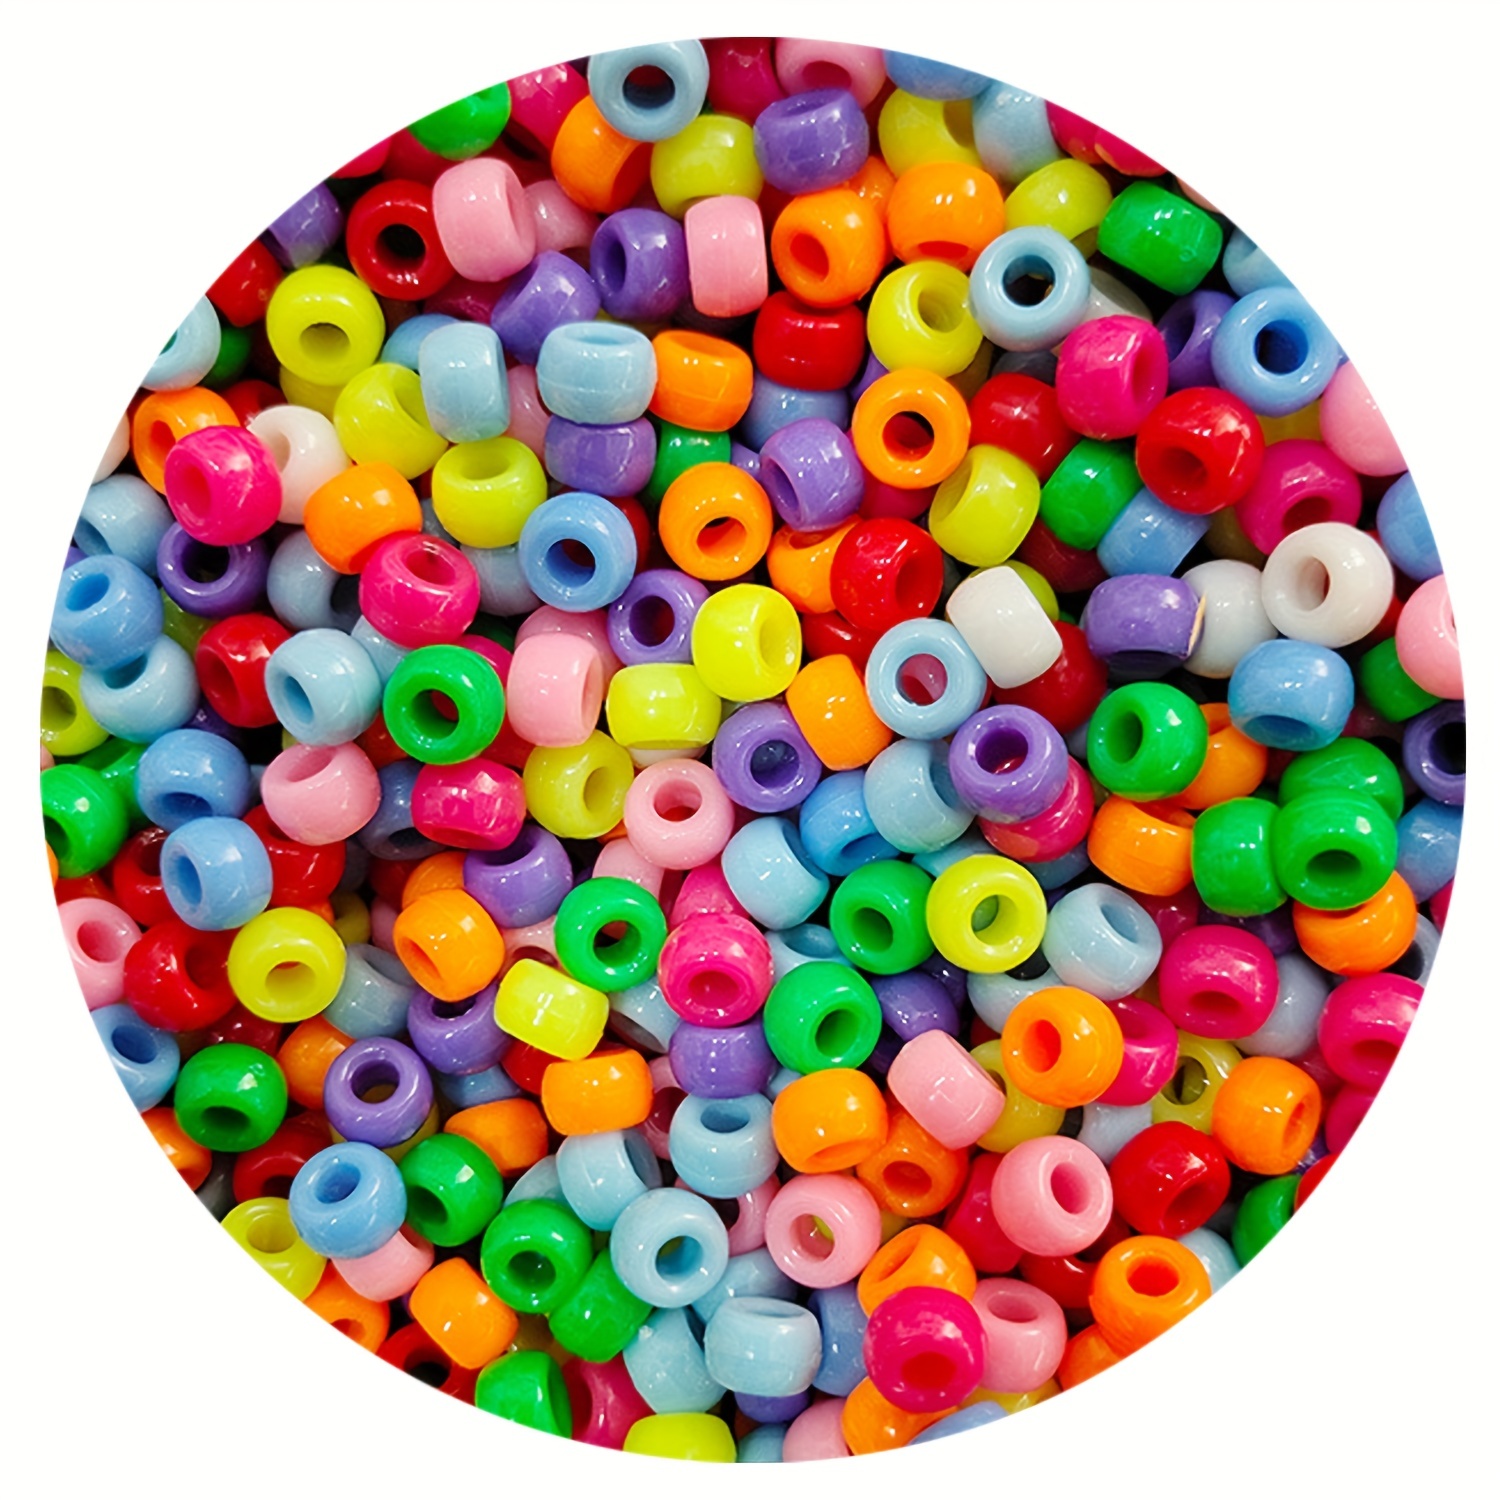 Pony Beads Plastic Beads Multi-Colored Beads for Hair Braiding